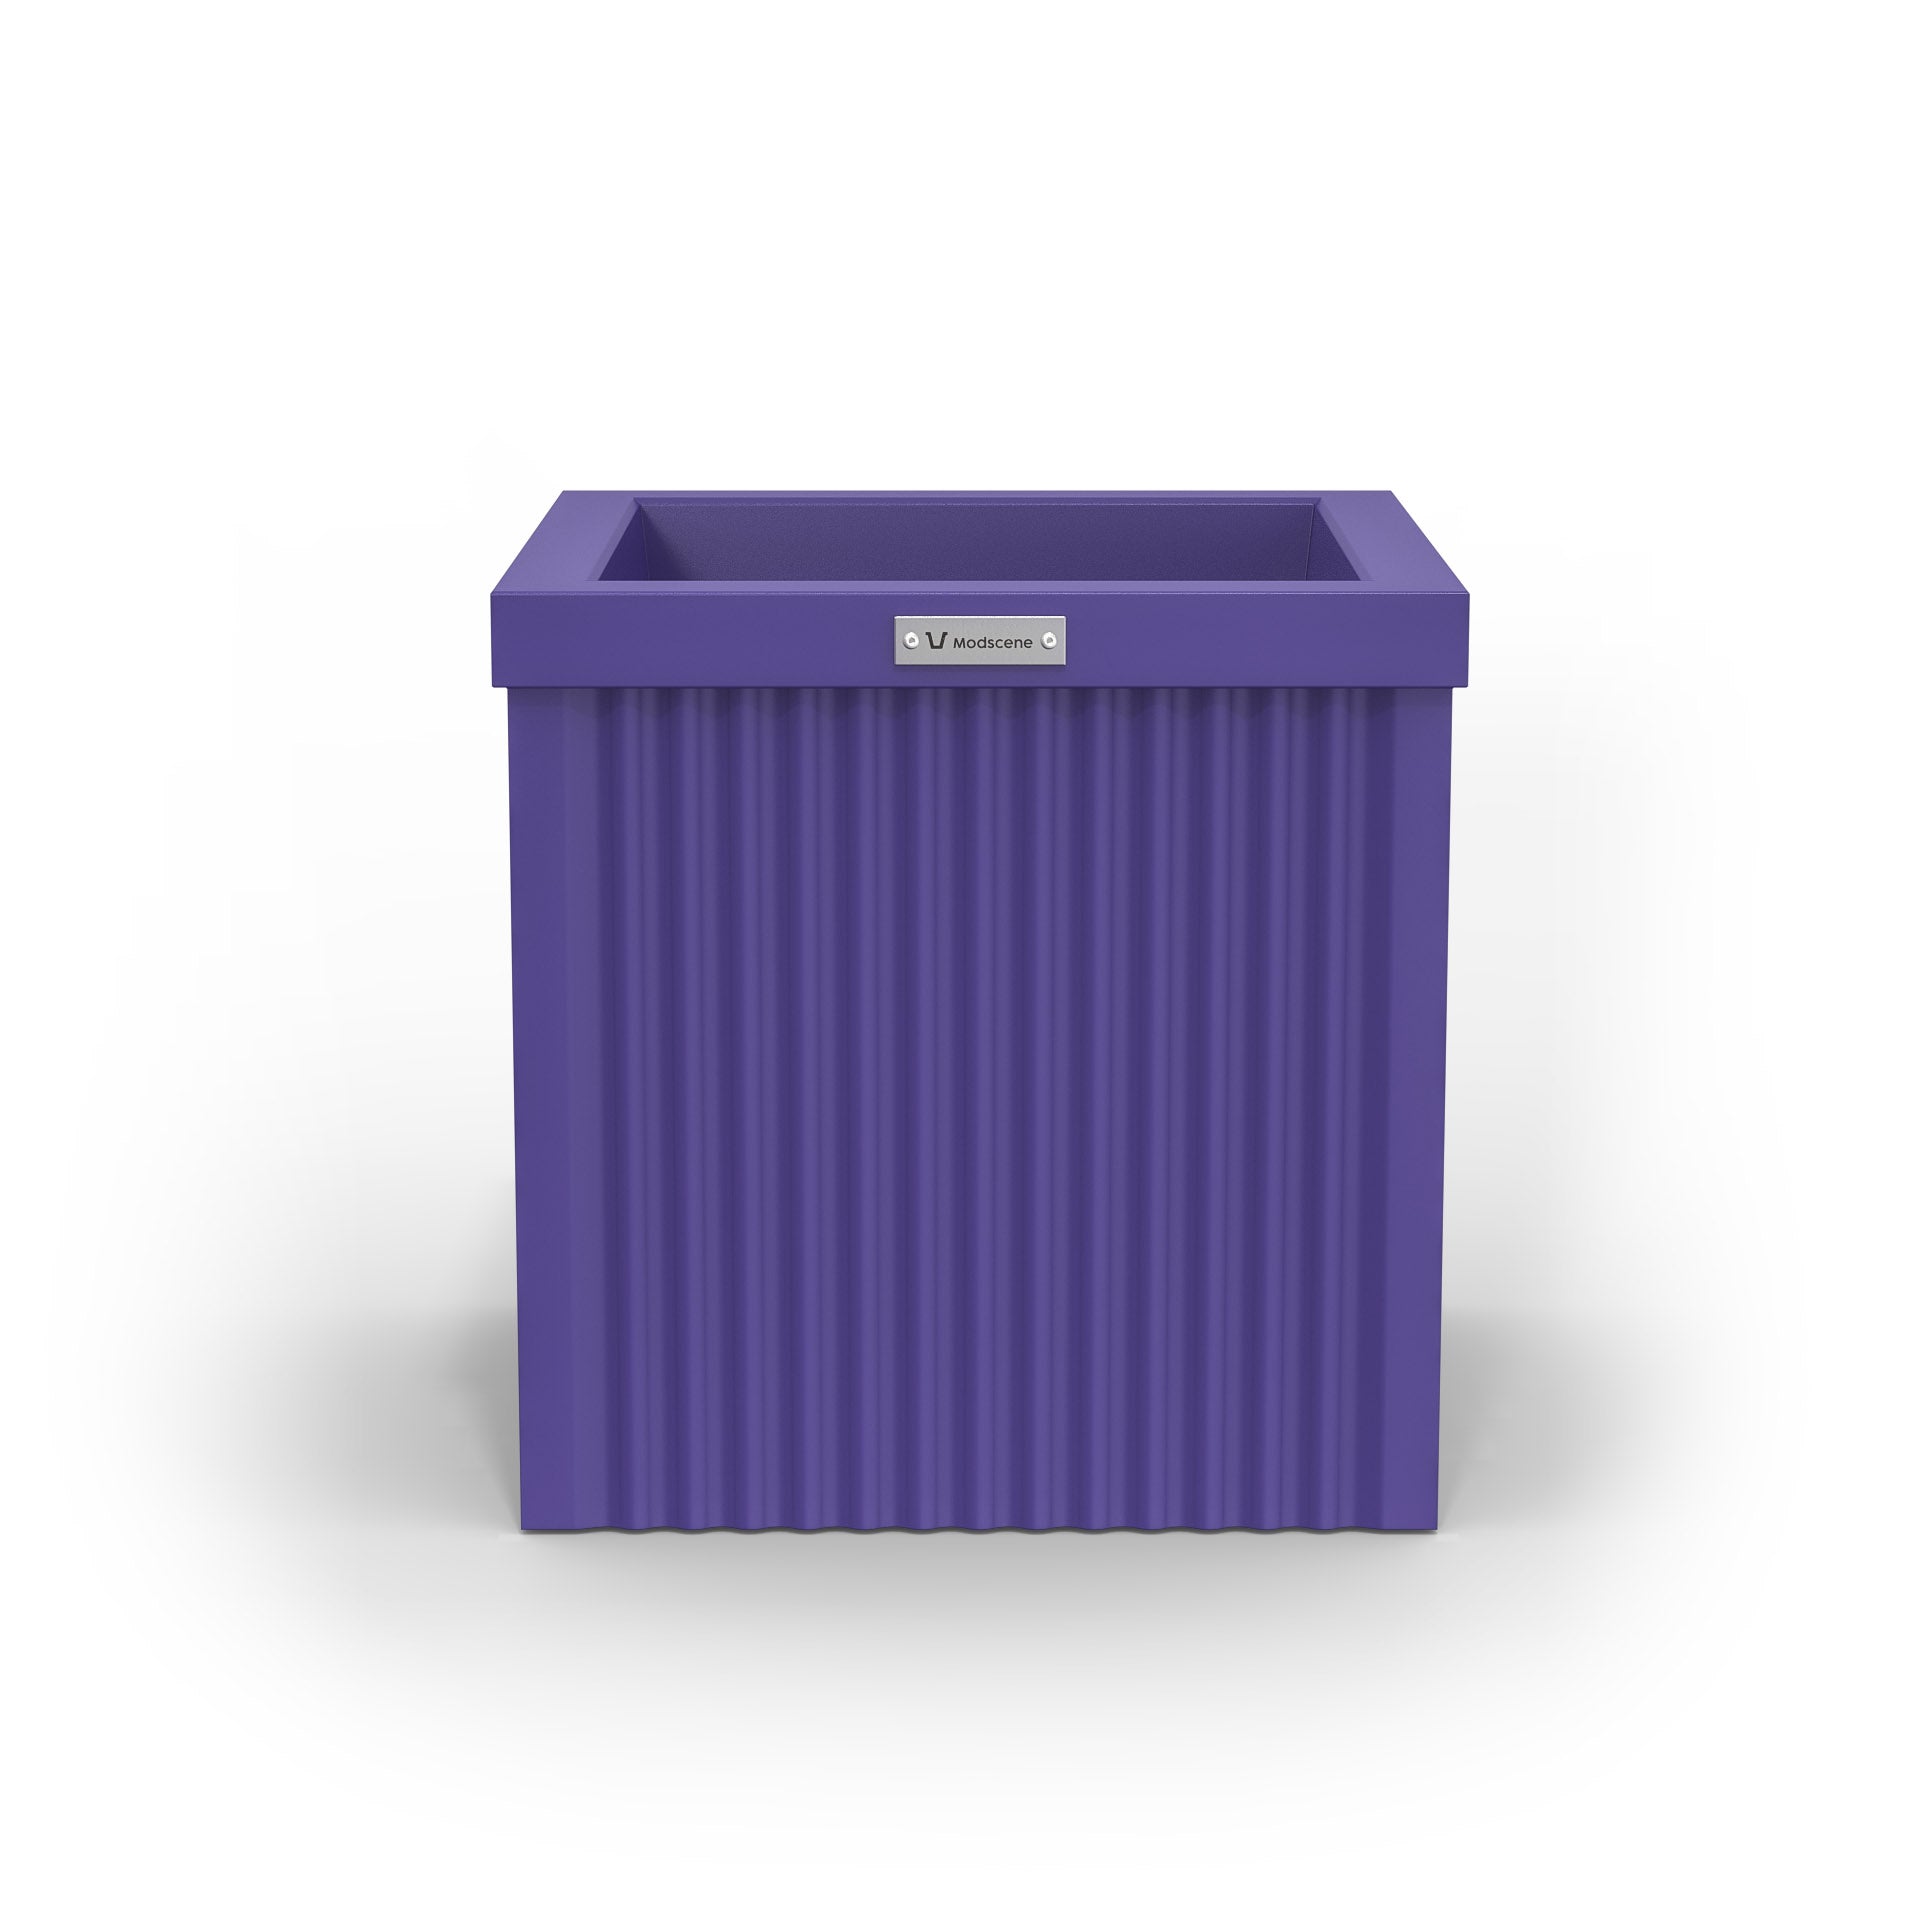 A small cube shaped planter pot in a purple colour made by Modscene.